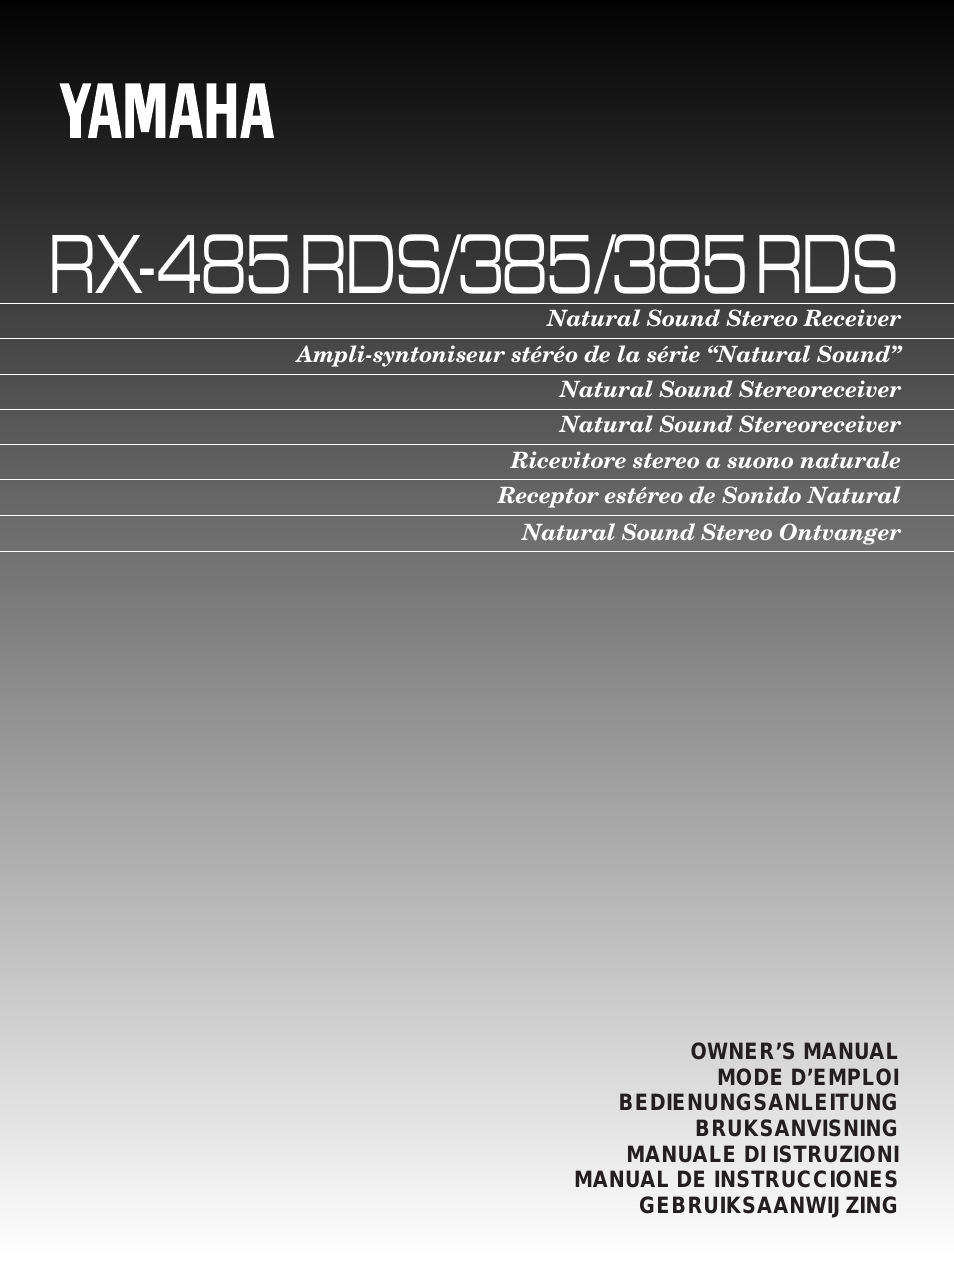 RX-485 RDS (Page 1)